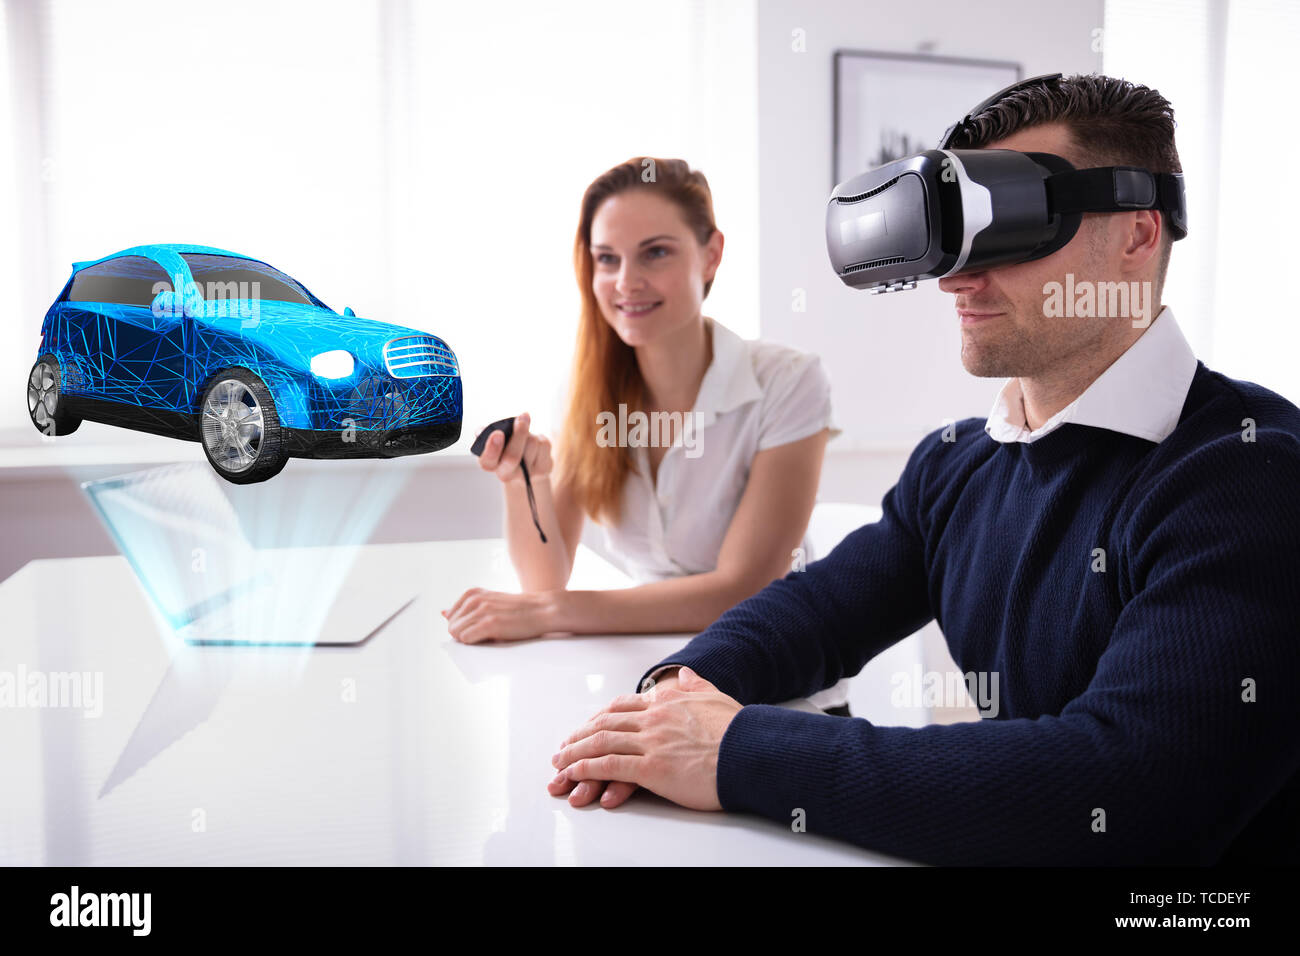 Man Wearing VR Headset Looking At Car Model With Female Agent Holding Remote Stock Photo